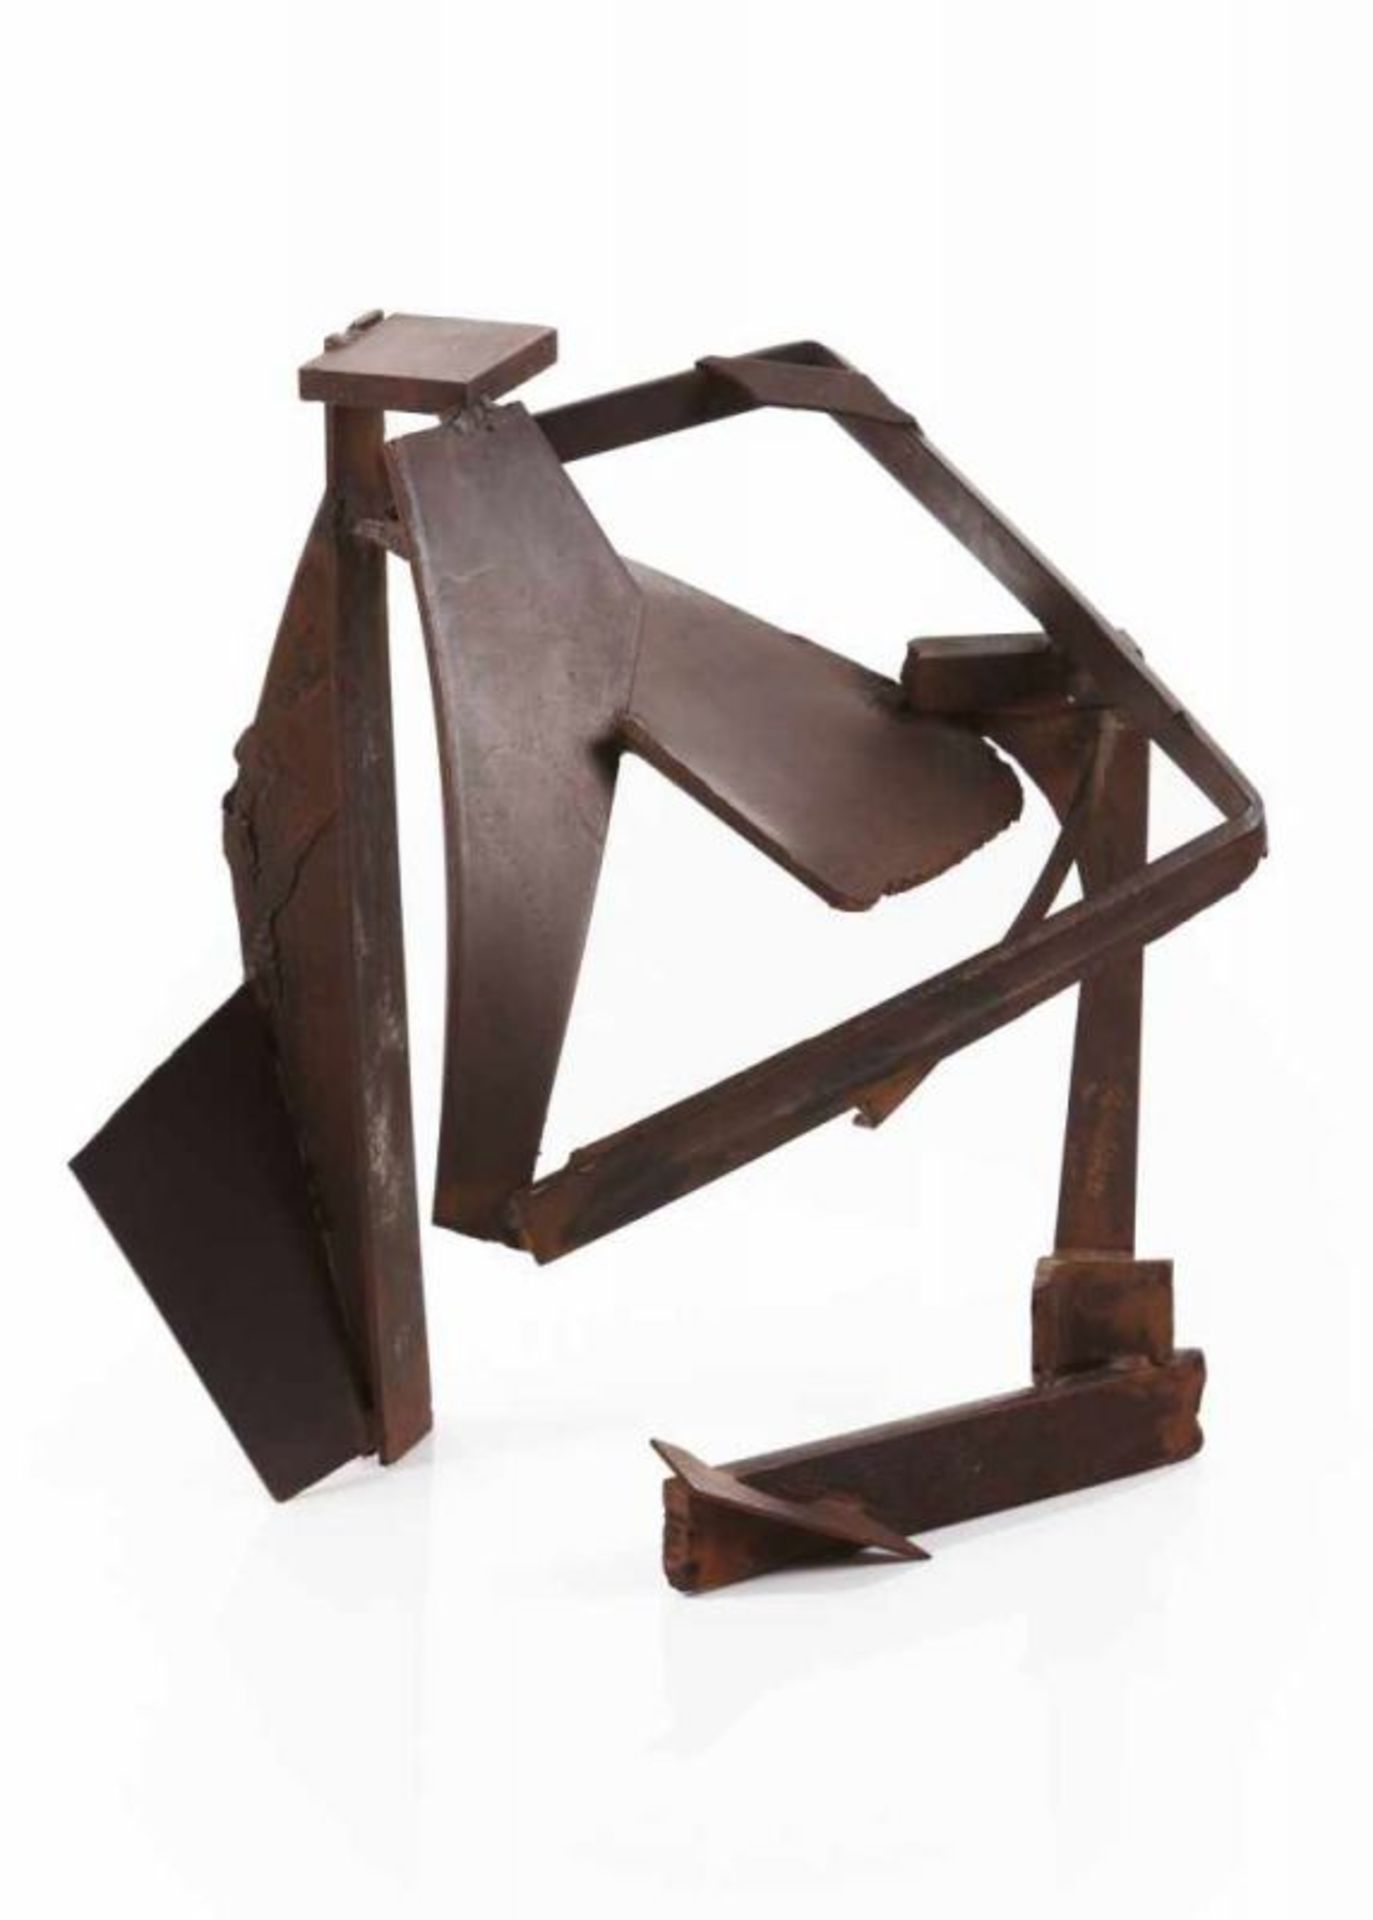 Anthony Caro (1924-2013)"Table Piece Z - 35", 1980/81Rusty and varnished steelLiterature:Dieter